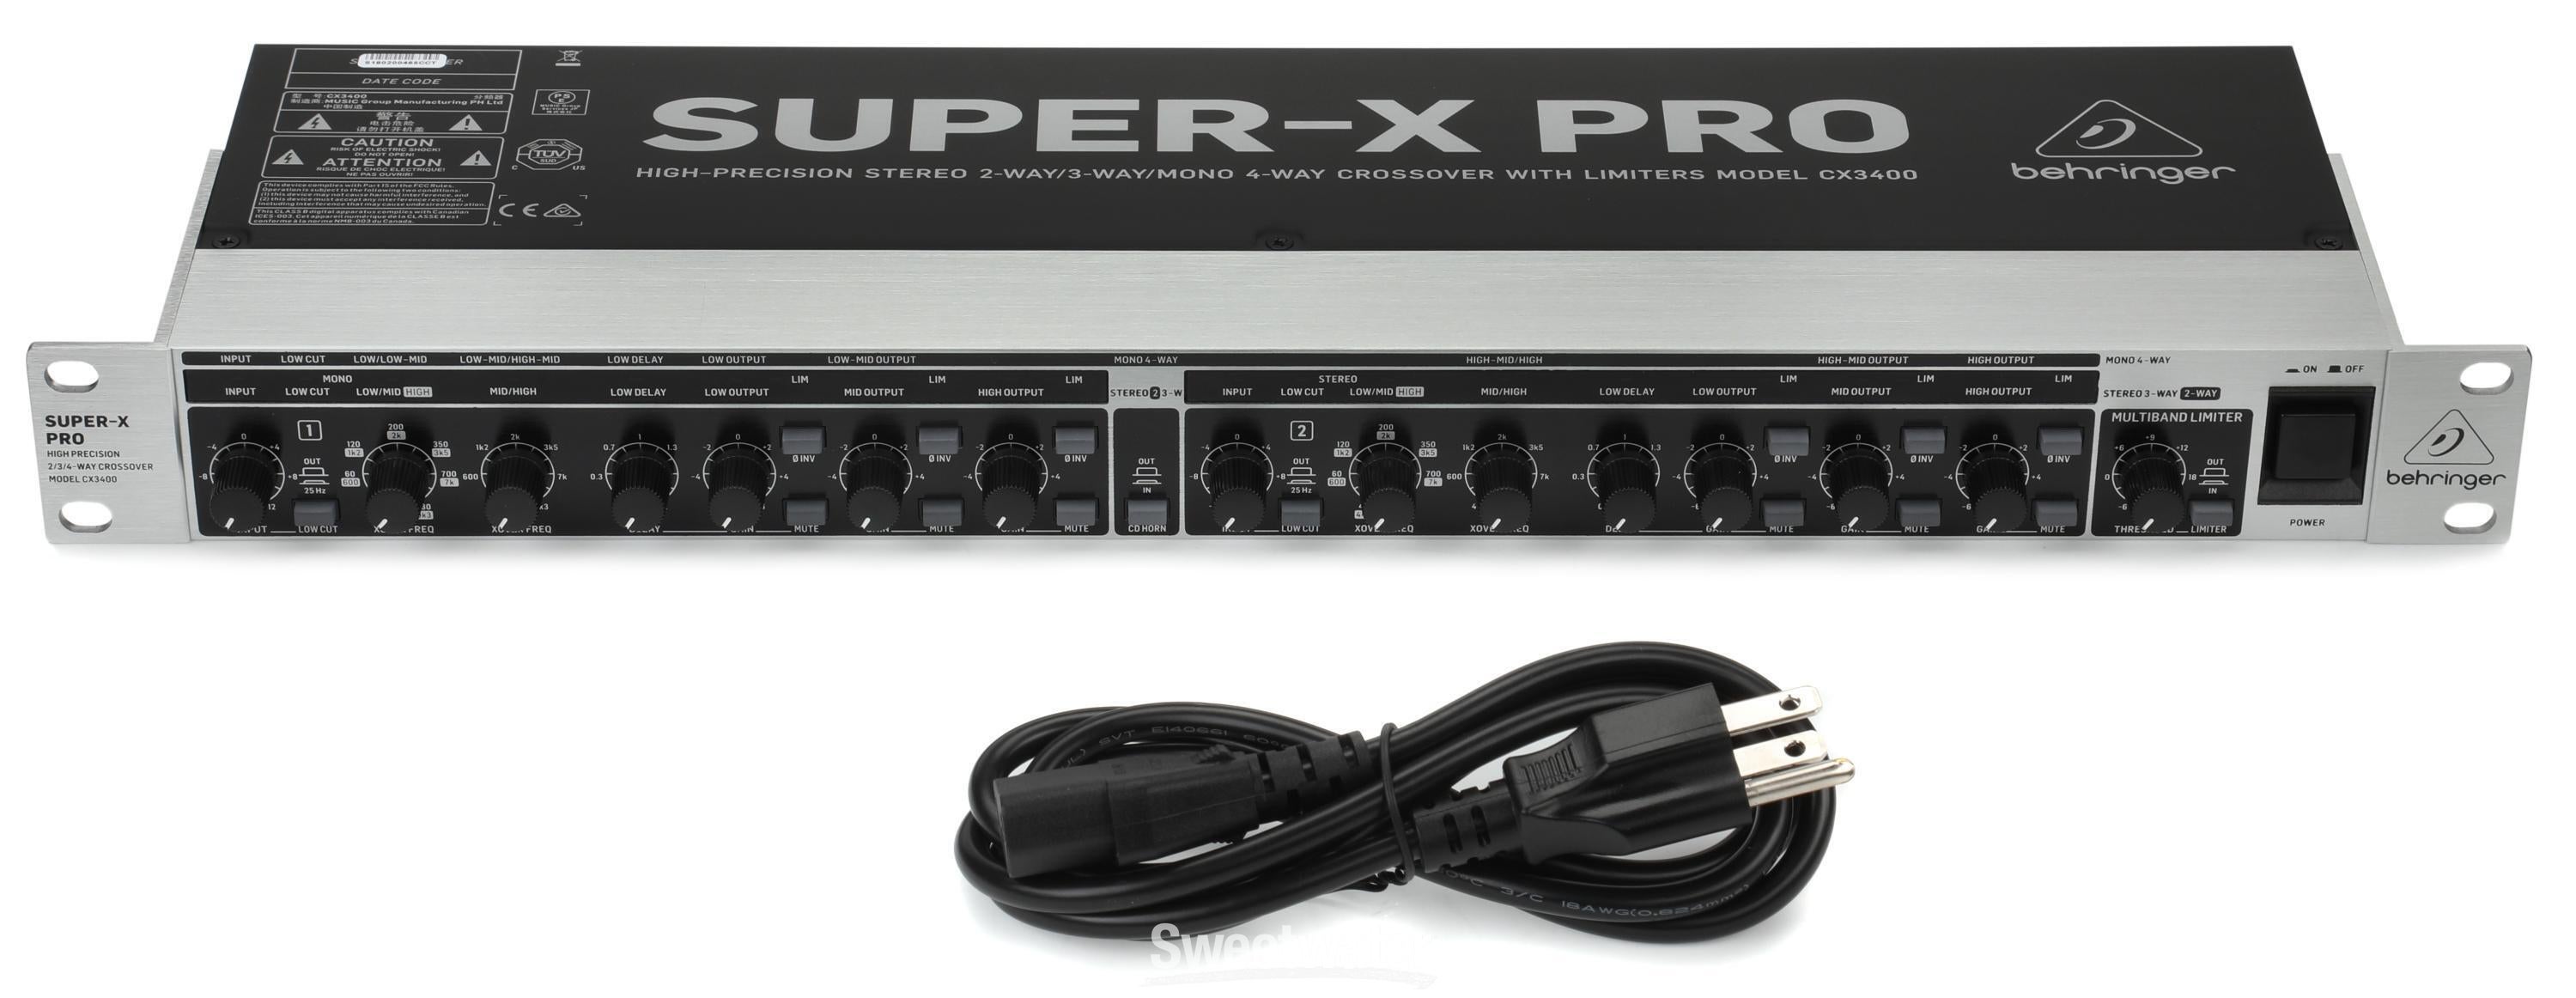 Behringer Super-X Pro CX3400 V2 Multi-channel Crossover with